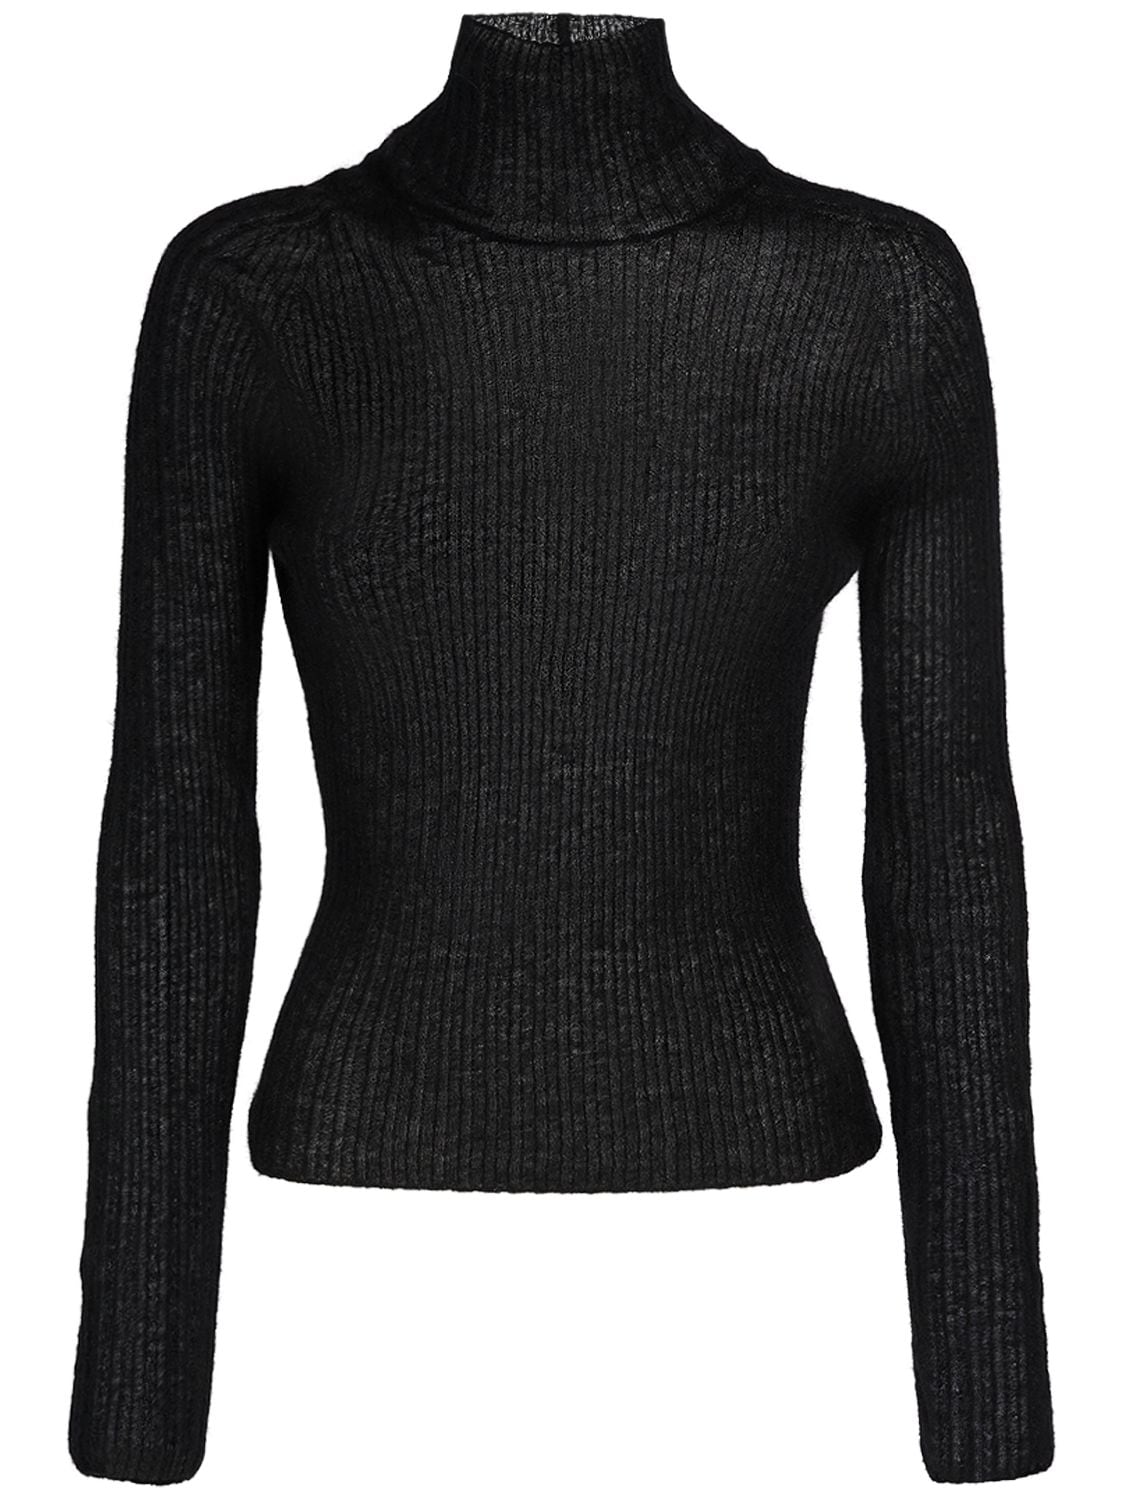 Image of Mohair Blend Turtleneck Sweater